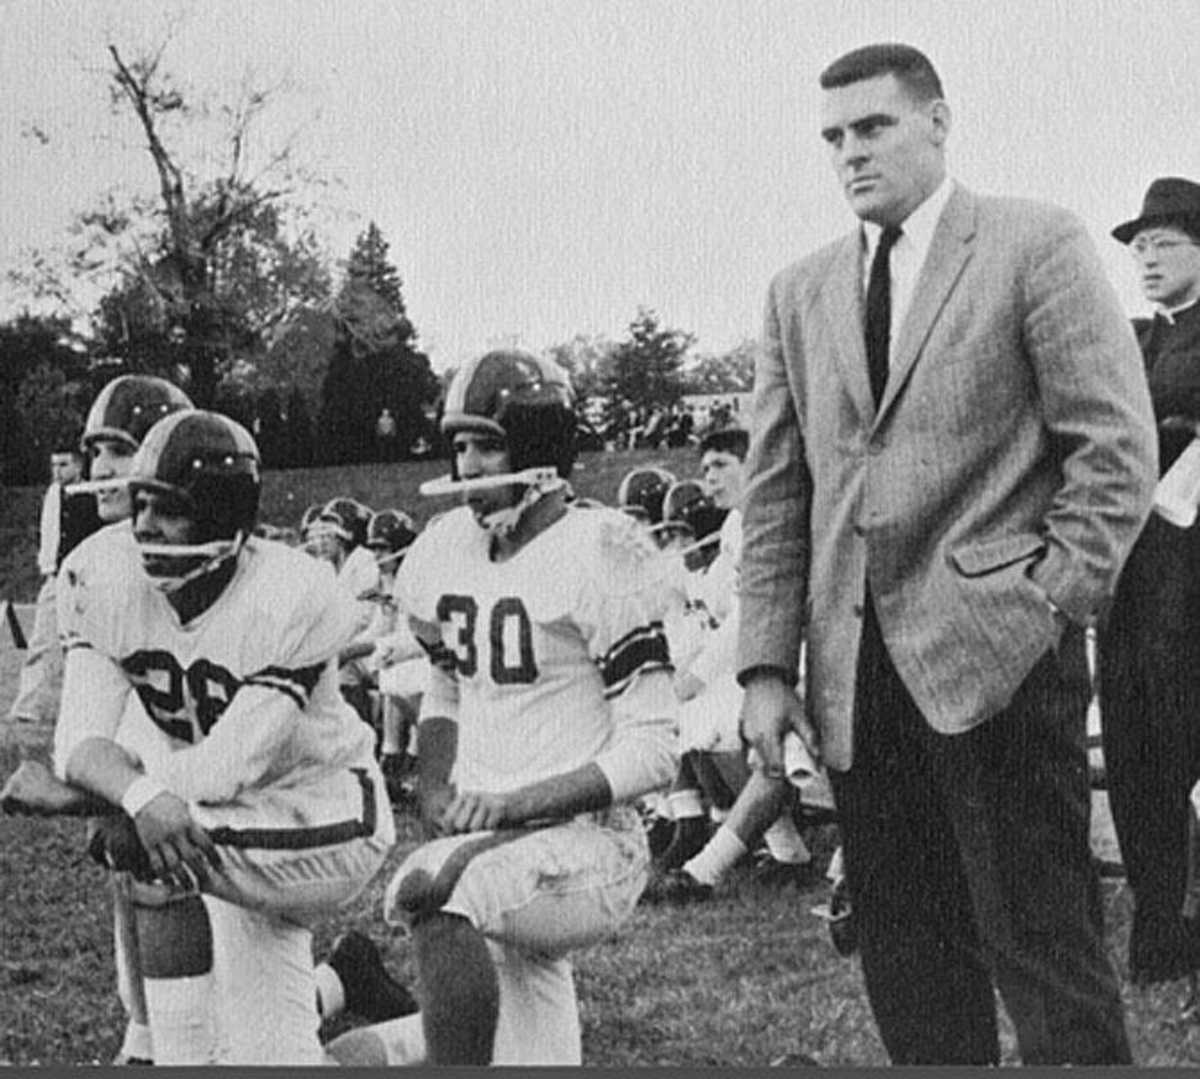 A young Joe Biden (30) crouches beside Archmere Academy football coach John Walsh in 1960.